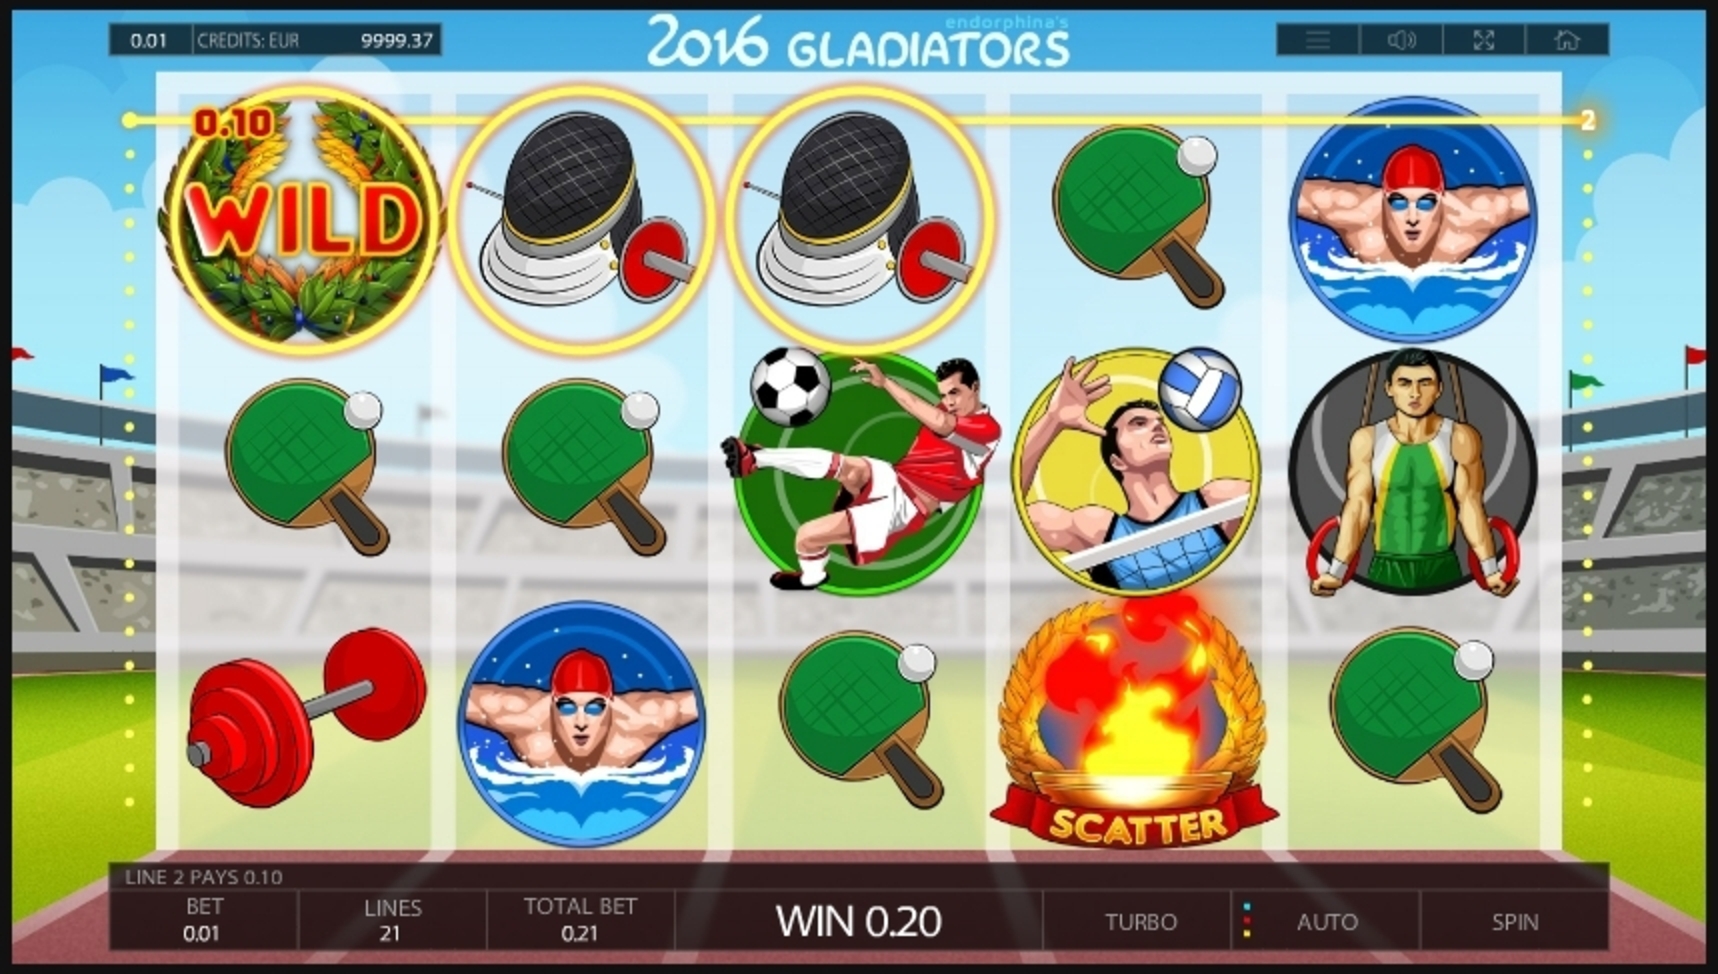 Win Money in 2016 Gladiators Free Slot Game by Endorphina